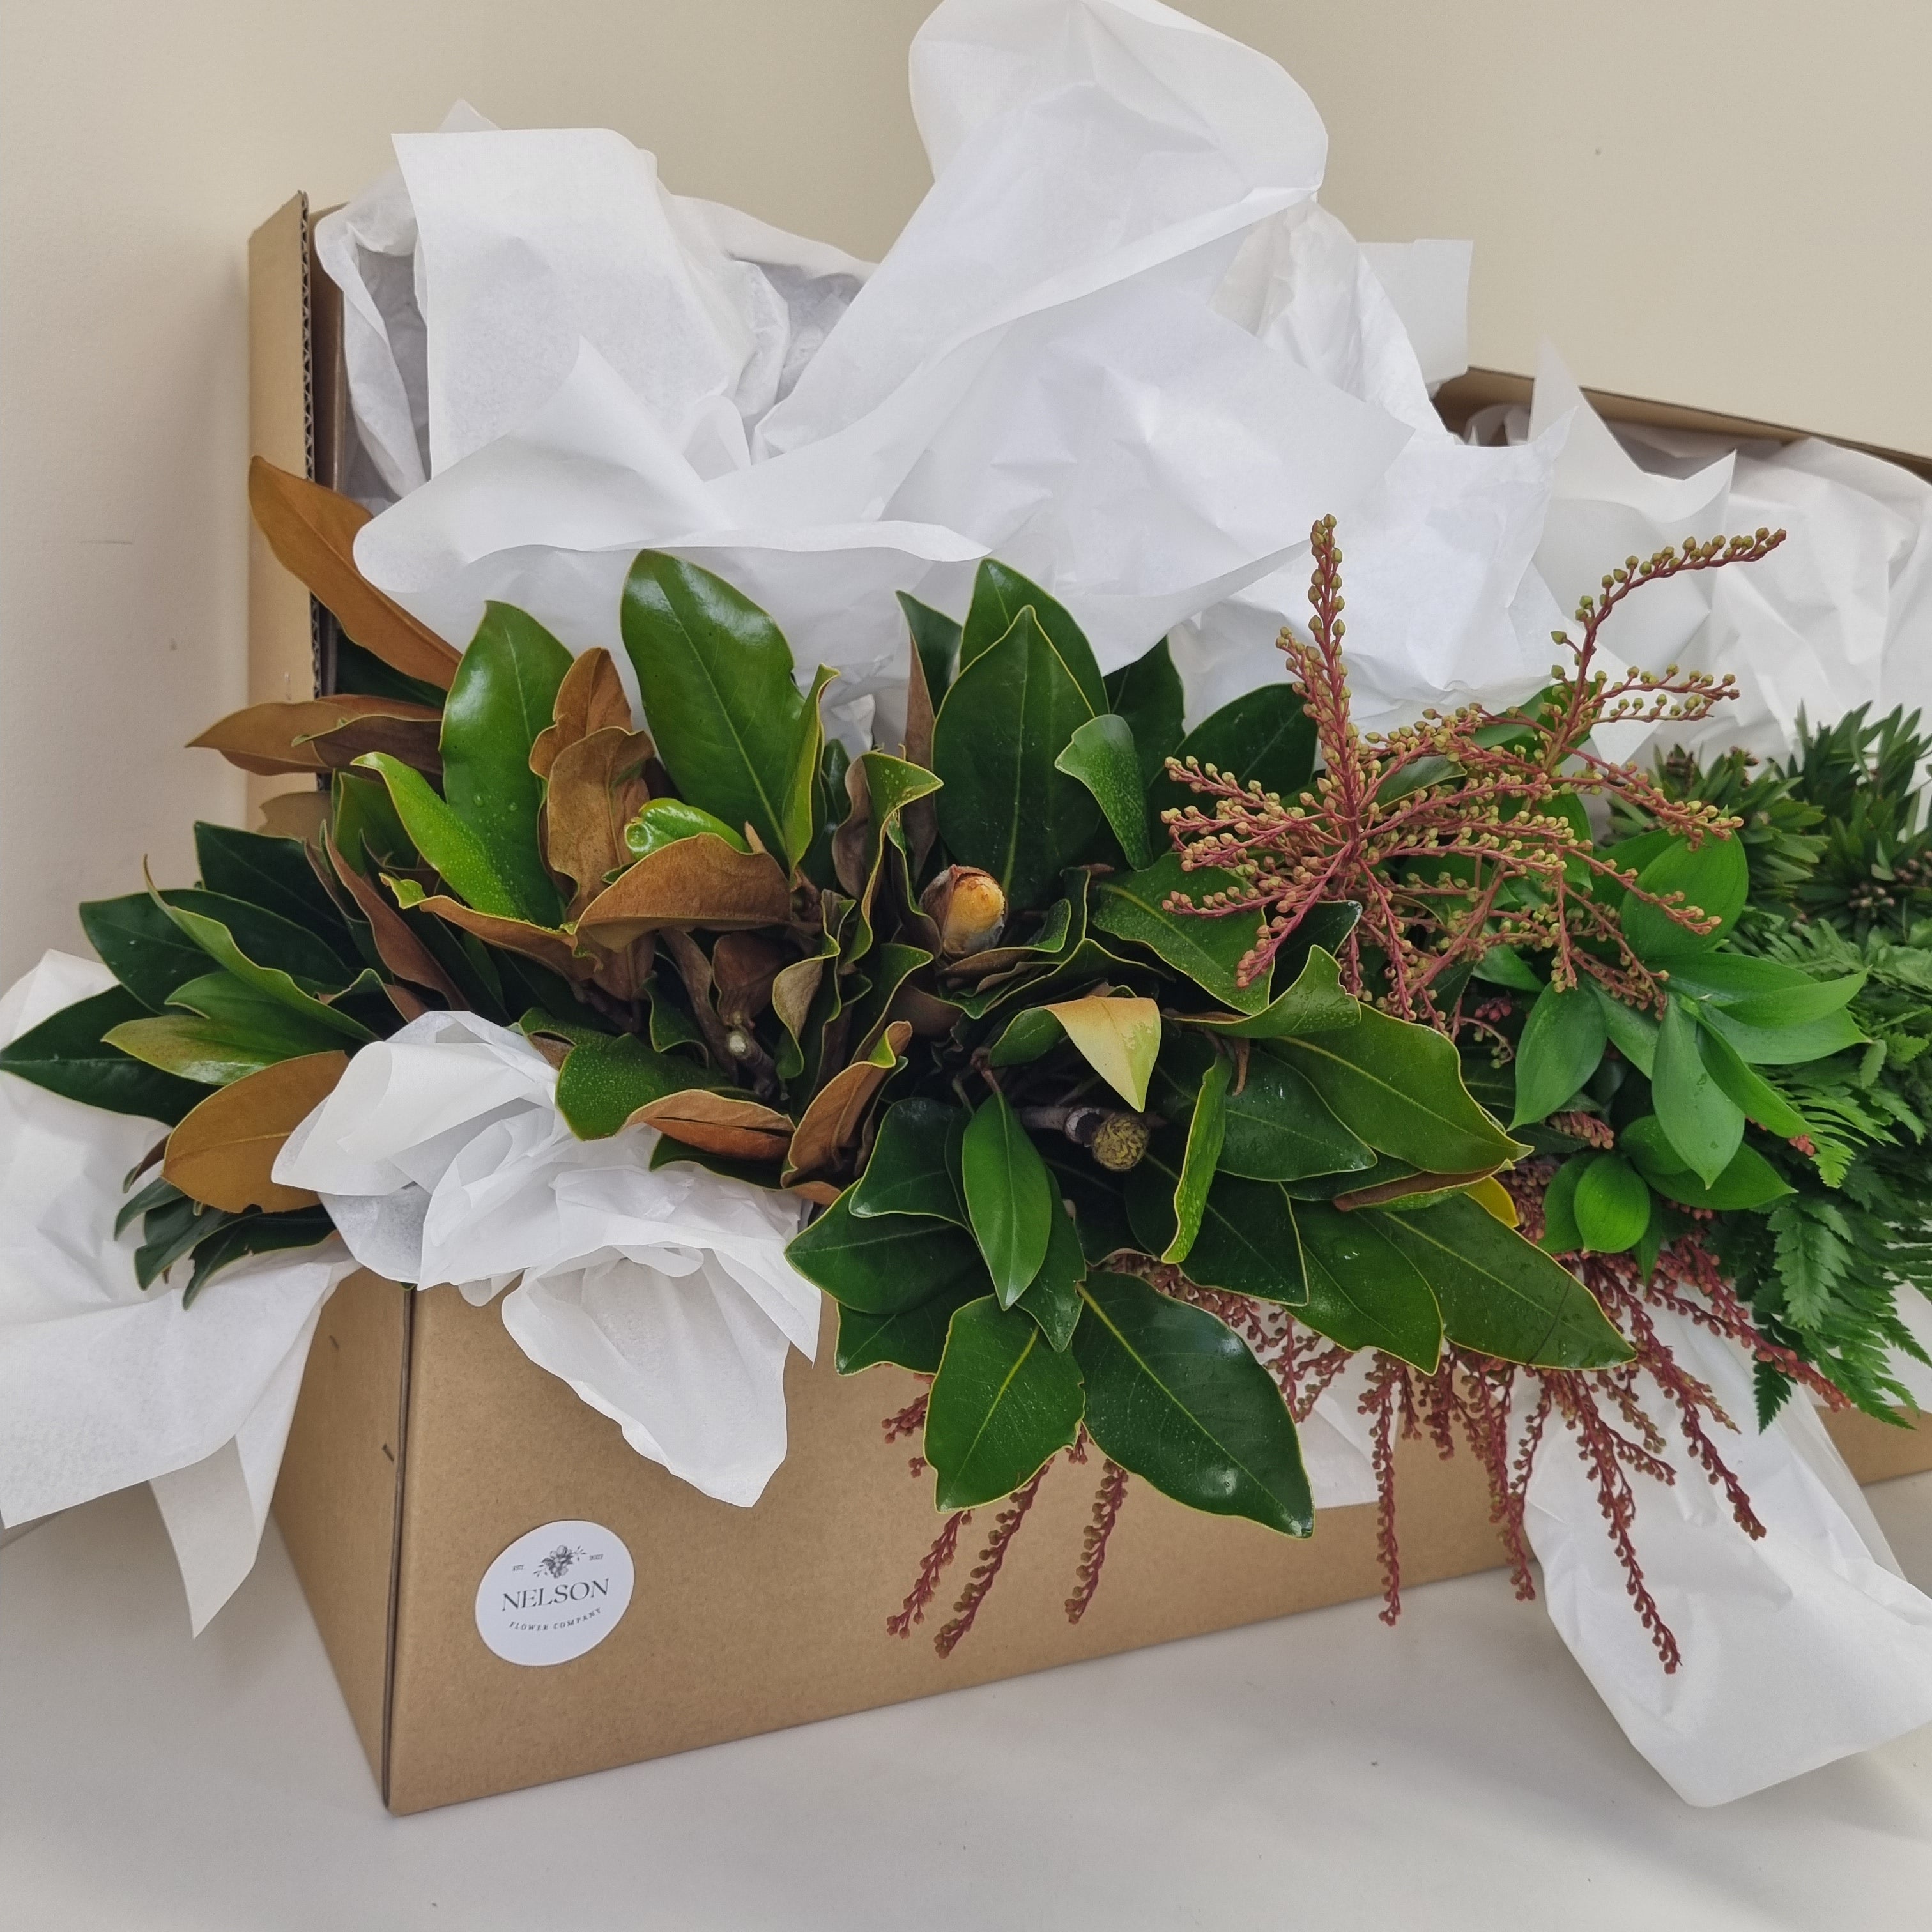 Dry foliage and greenery for floristry